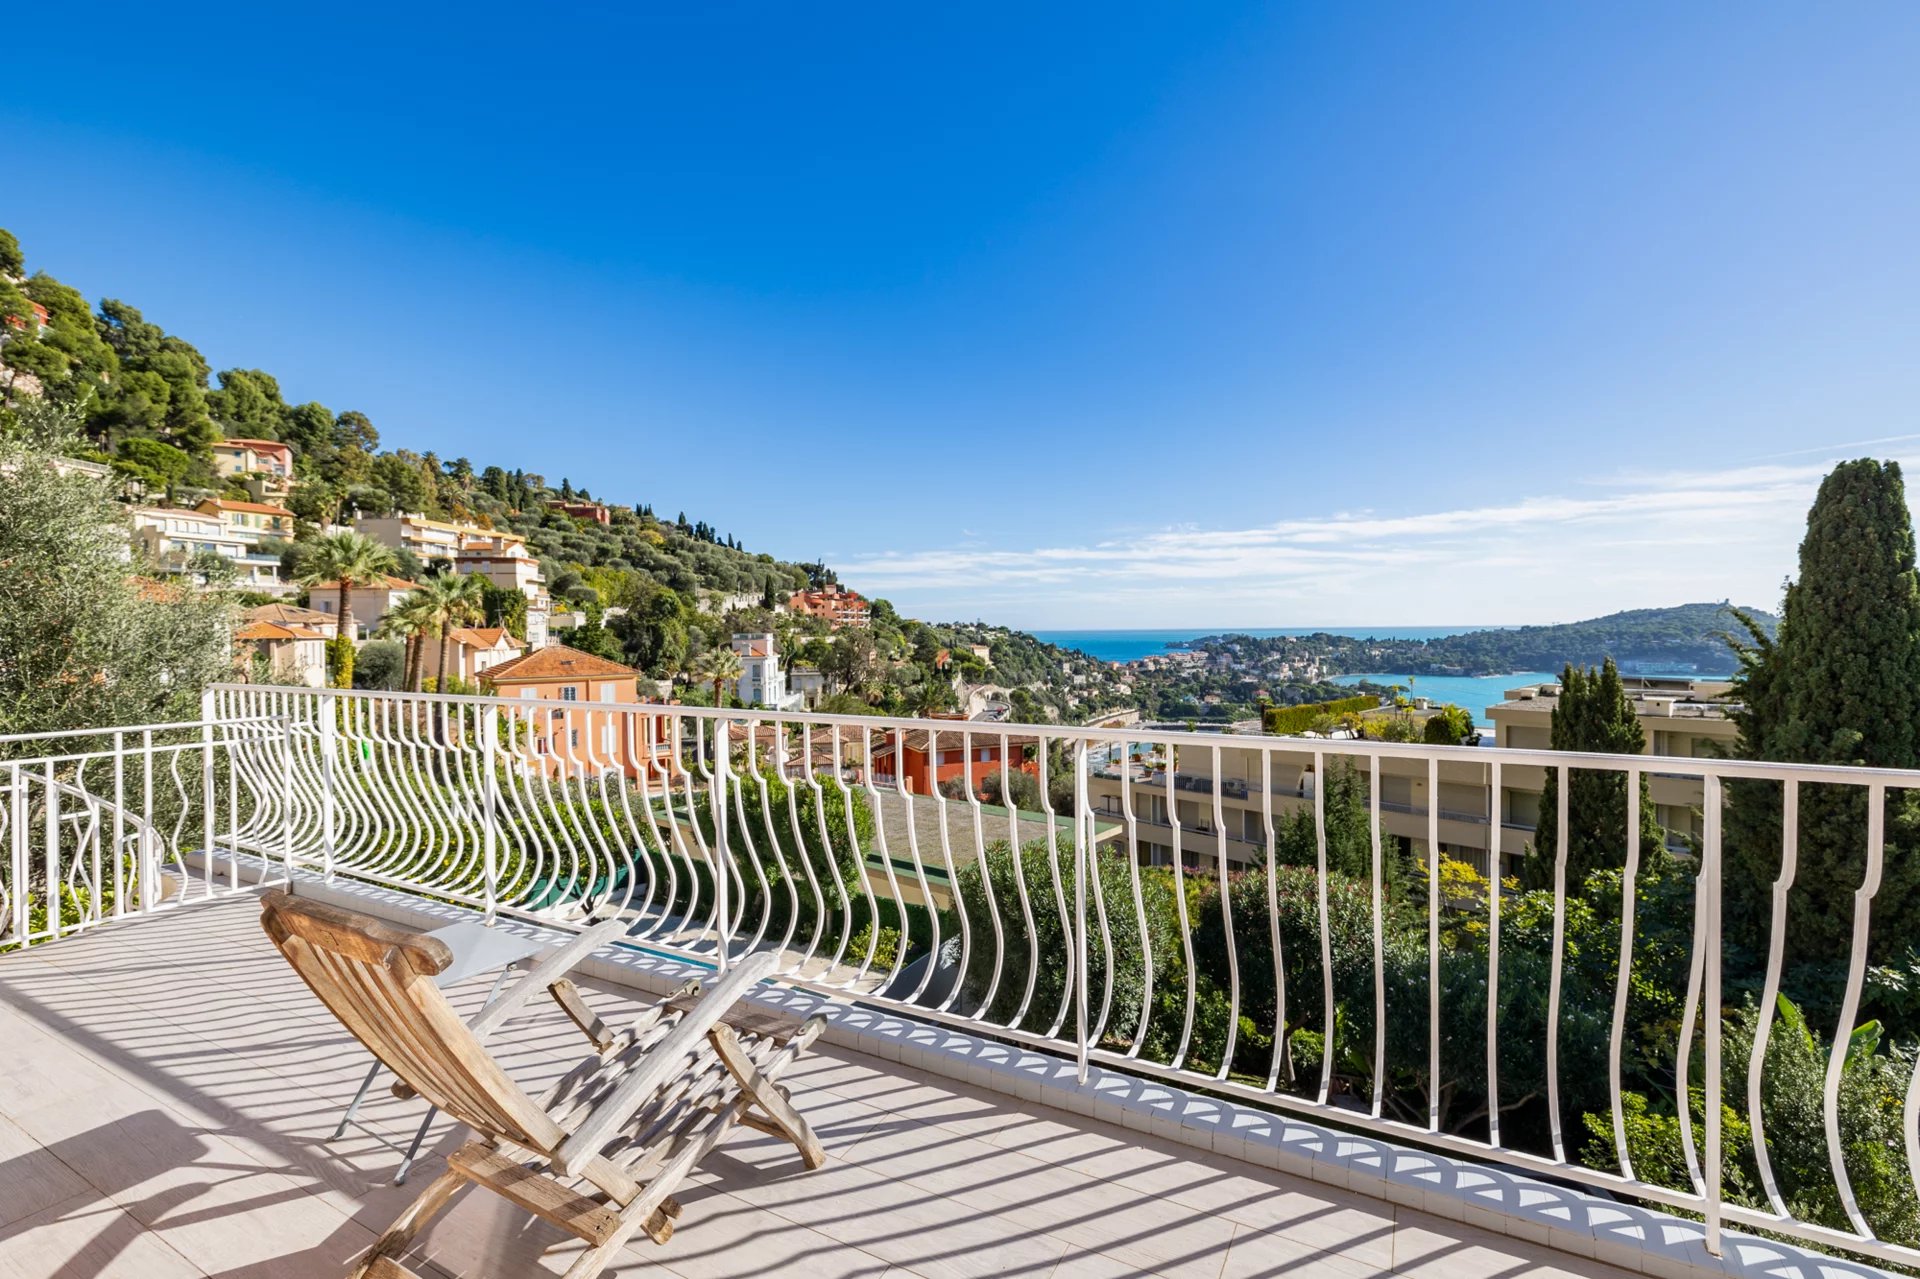 HOUSE FOR SALE IN VILLEFRANCHE SUR MER - SEA VIEW - SWIMMING POOL - QUIET - GARDEN